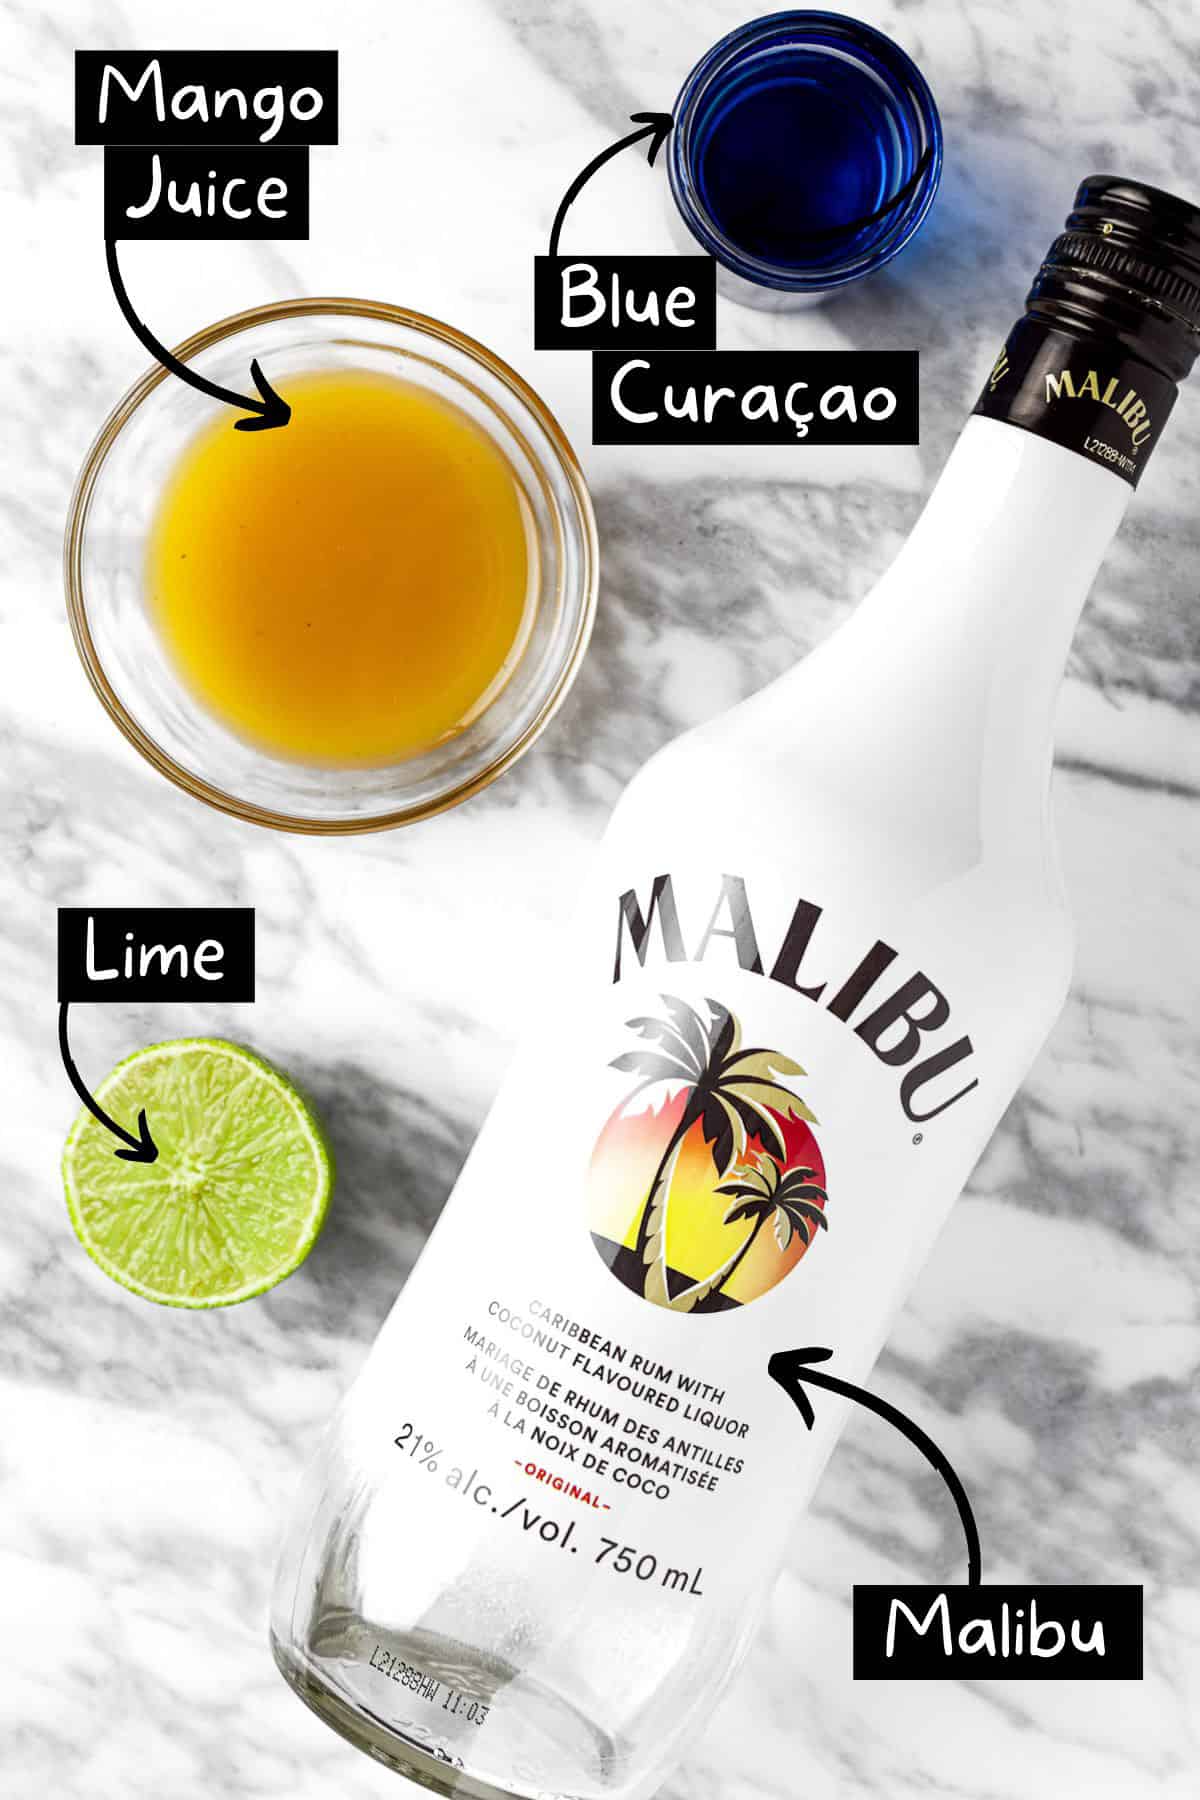 The ingredients needed to make the malibu rum shots.